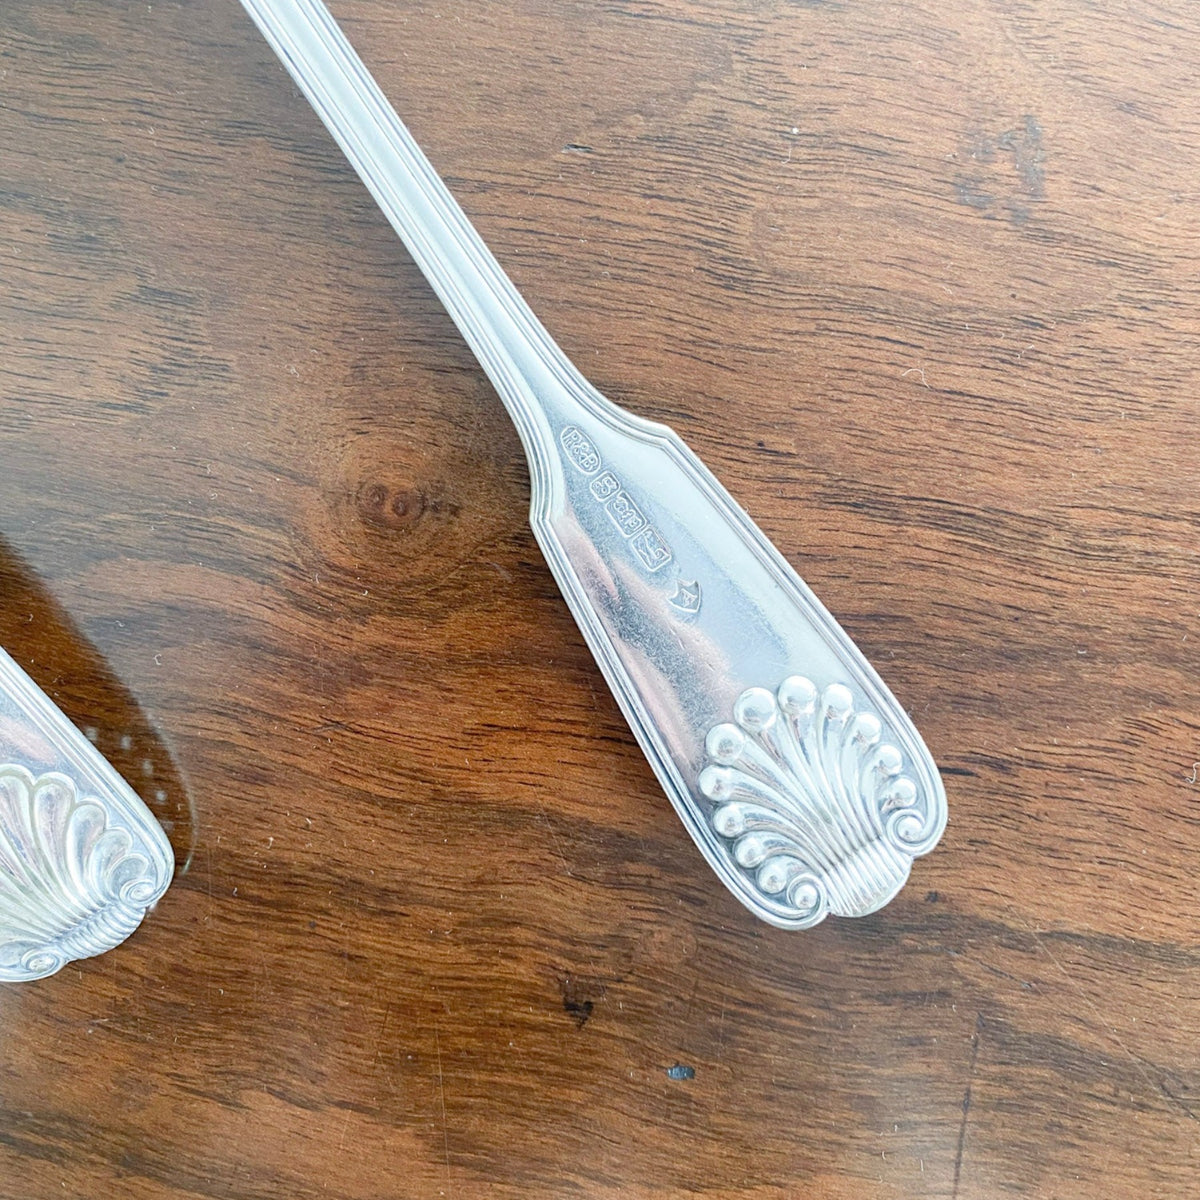 Set of Antique Silver Plate Serving Spoons